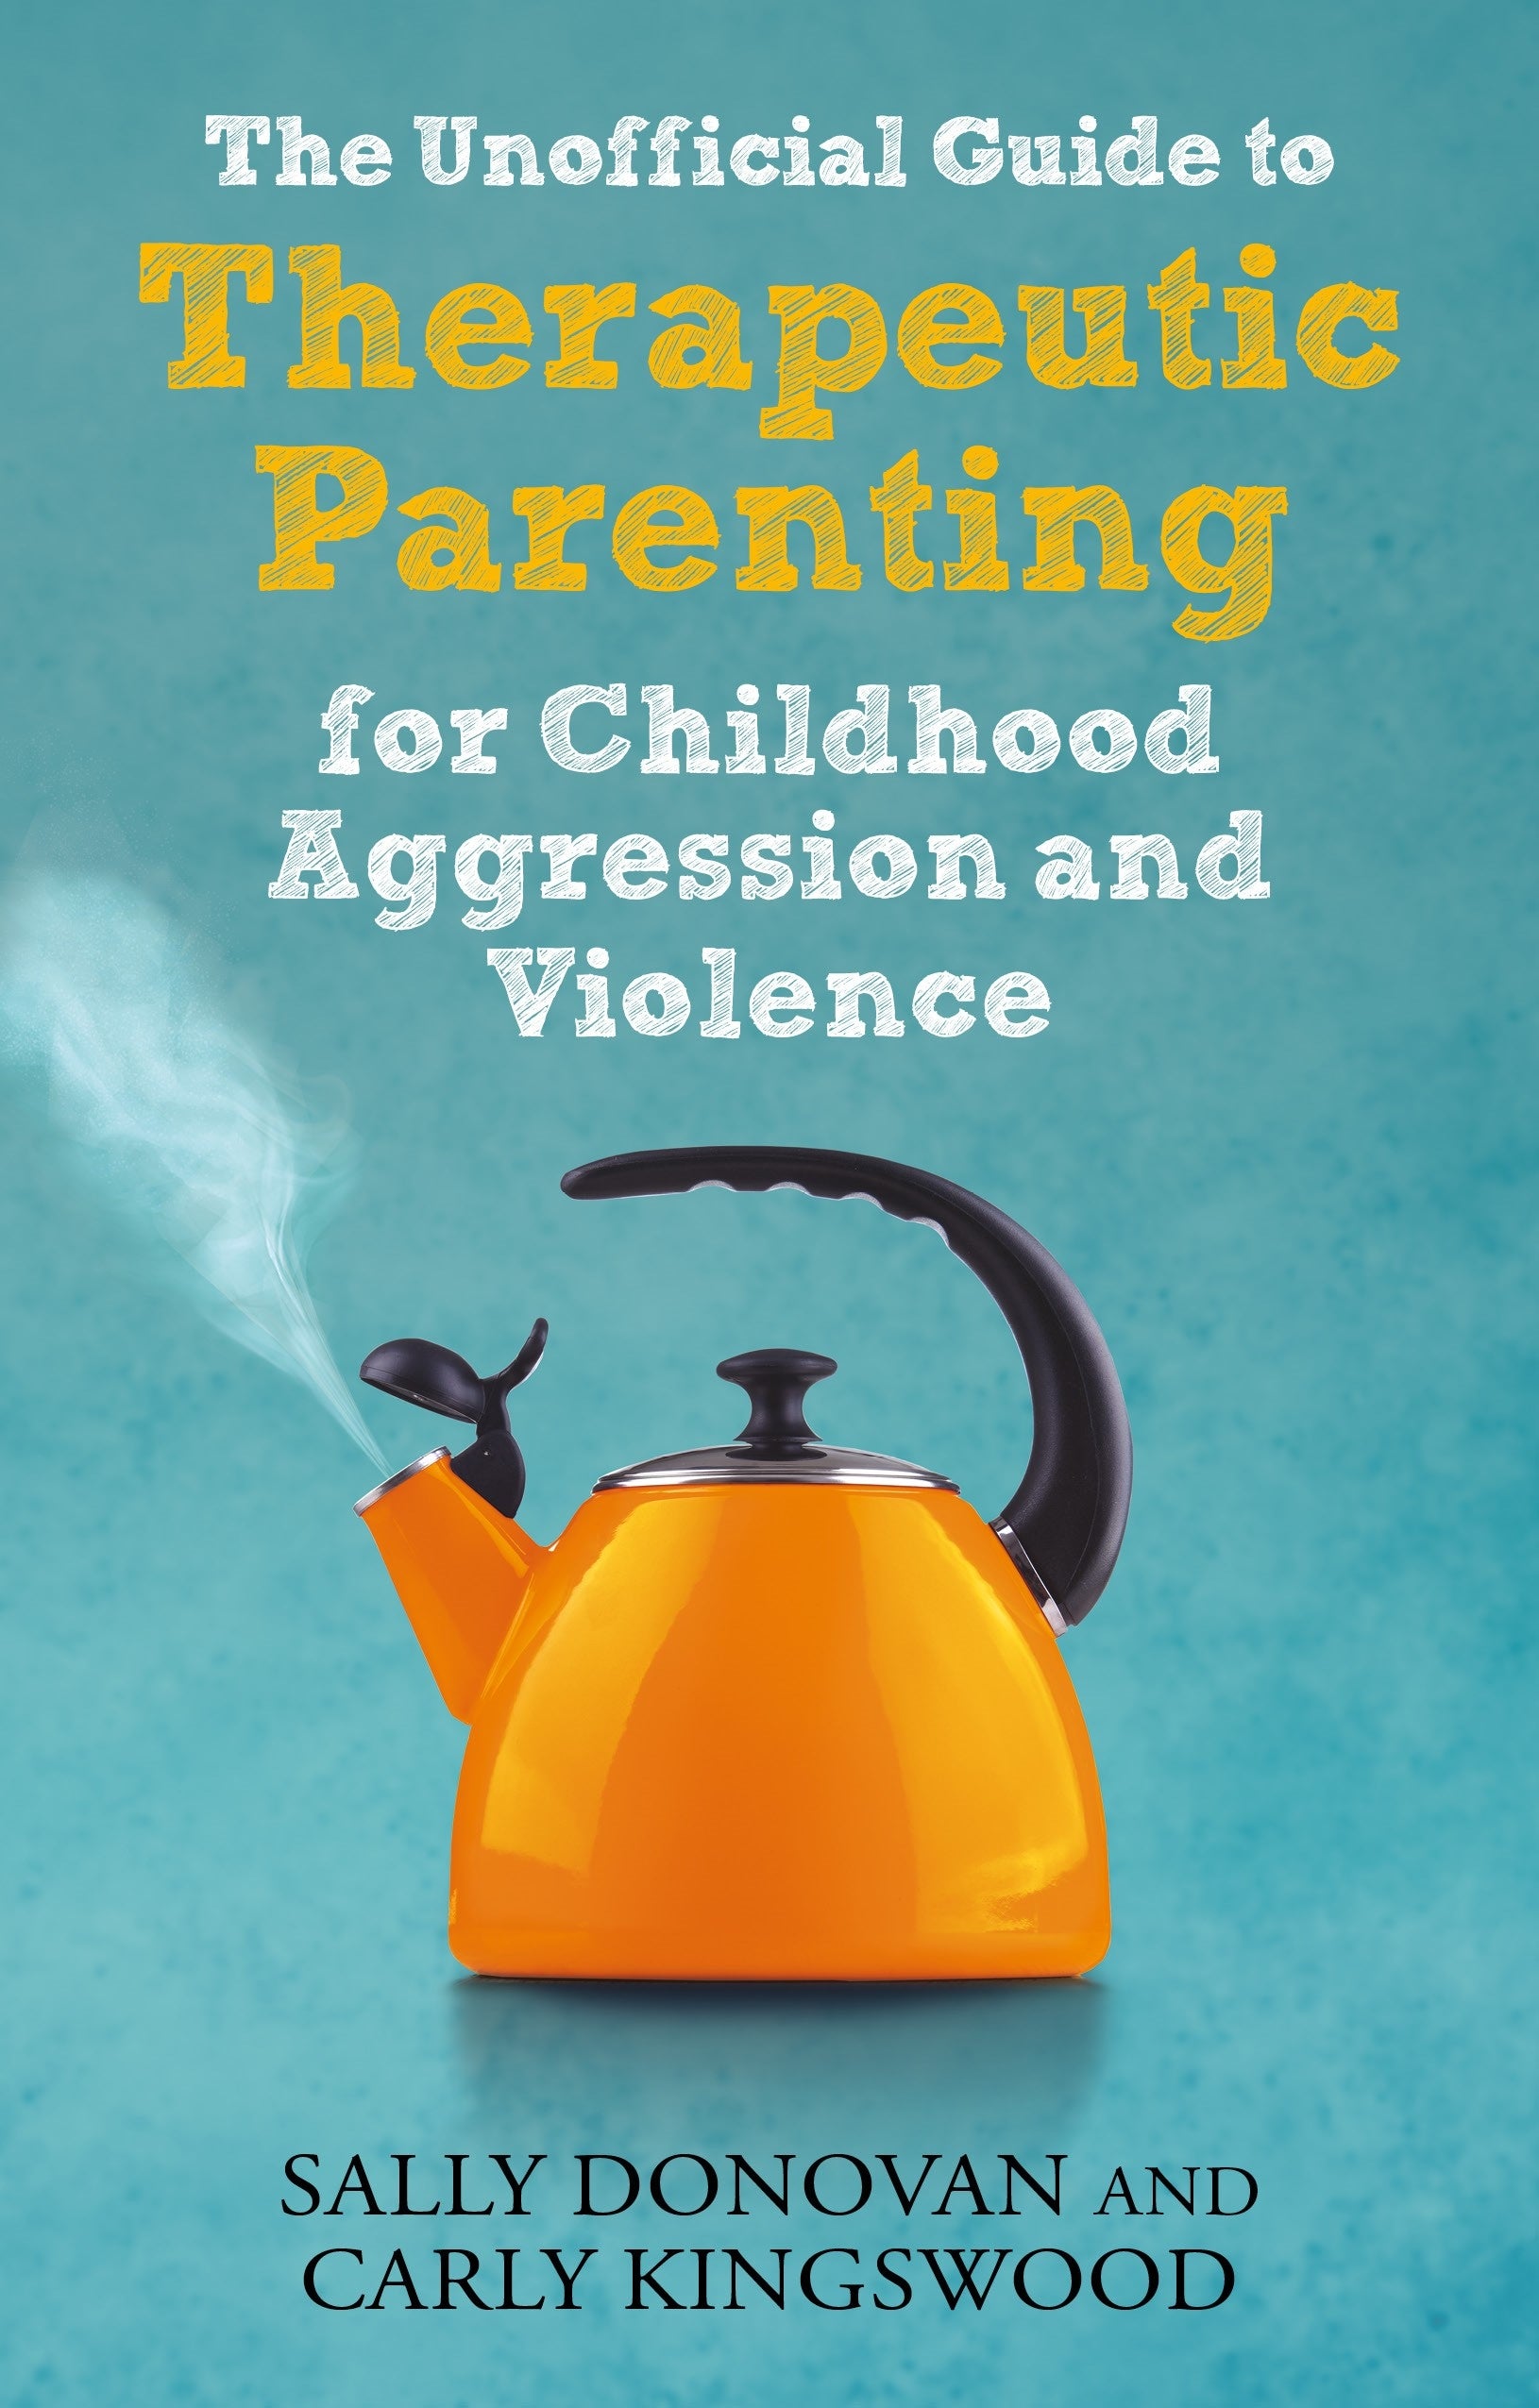 The Unofficial Guide to Therapeutic Parenting for Childhood Aggression and Violence by Sally Donovan, Carly Kingswood